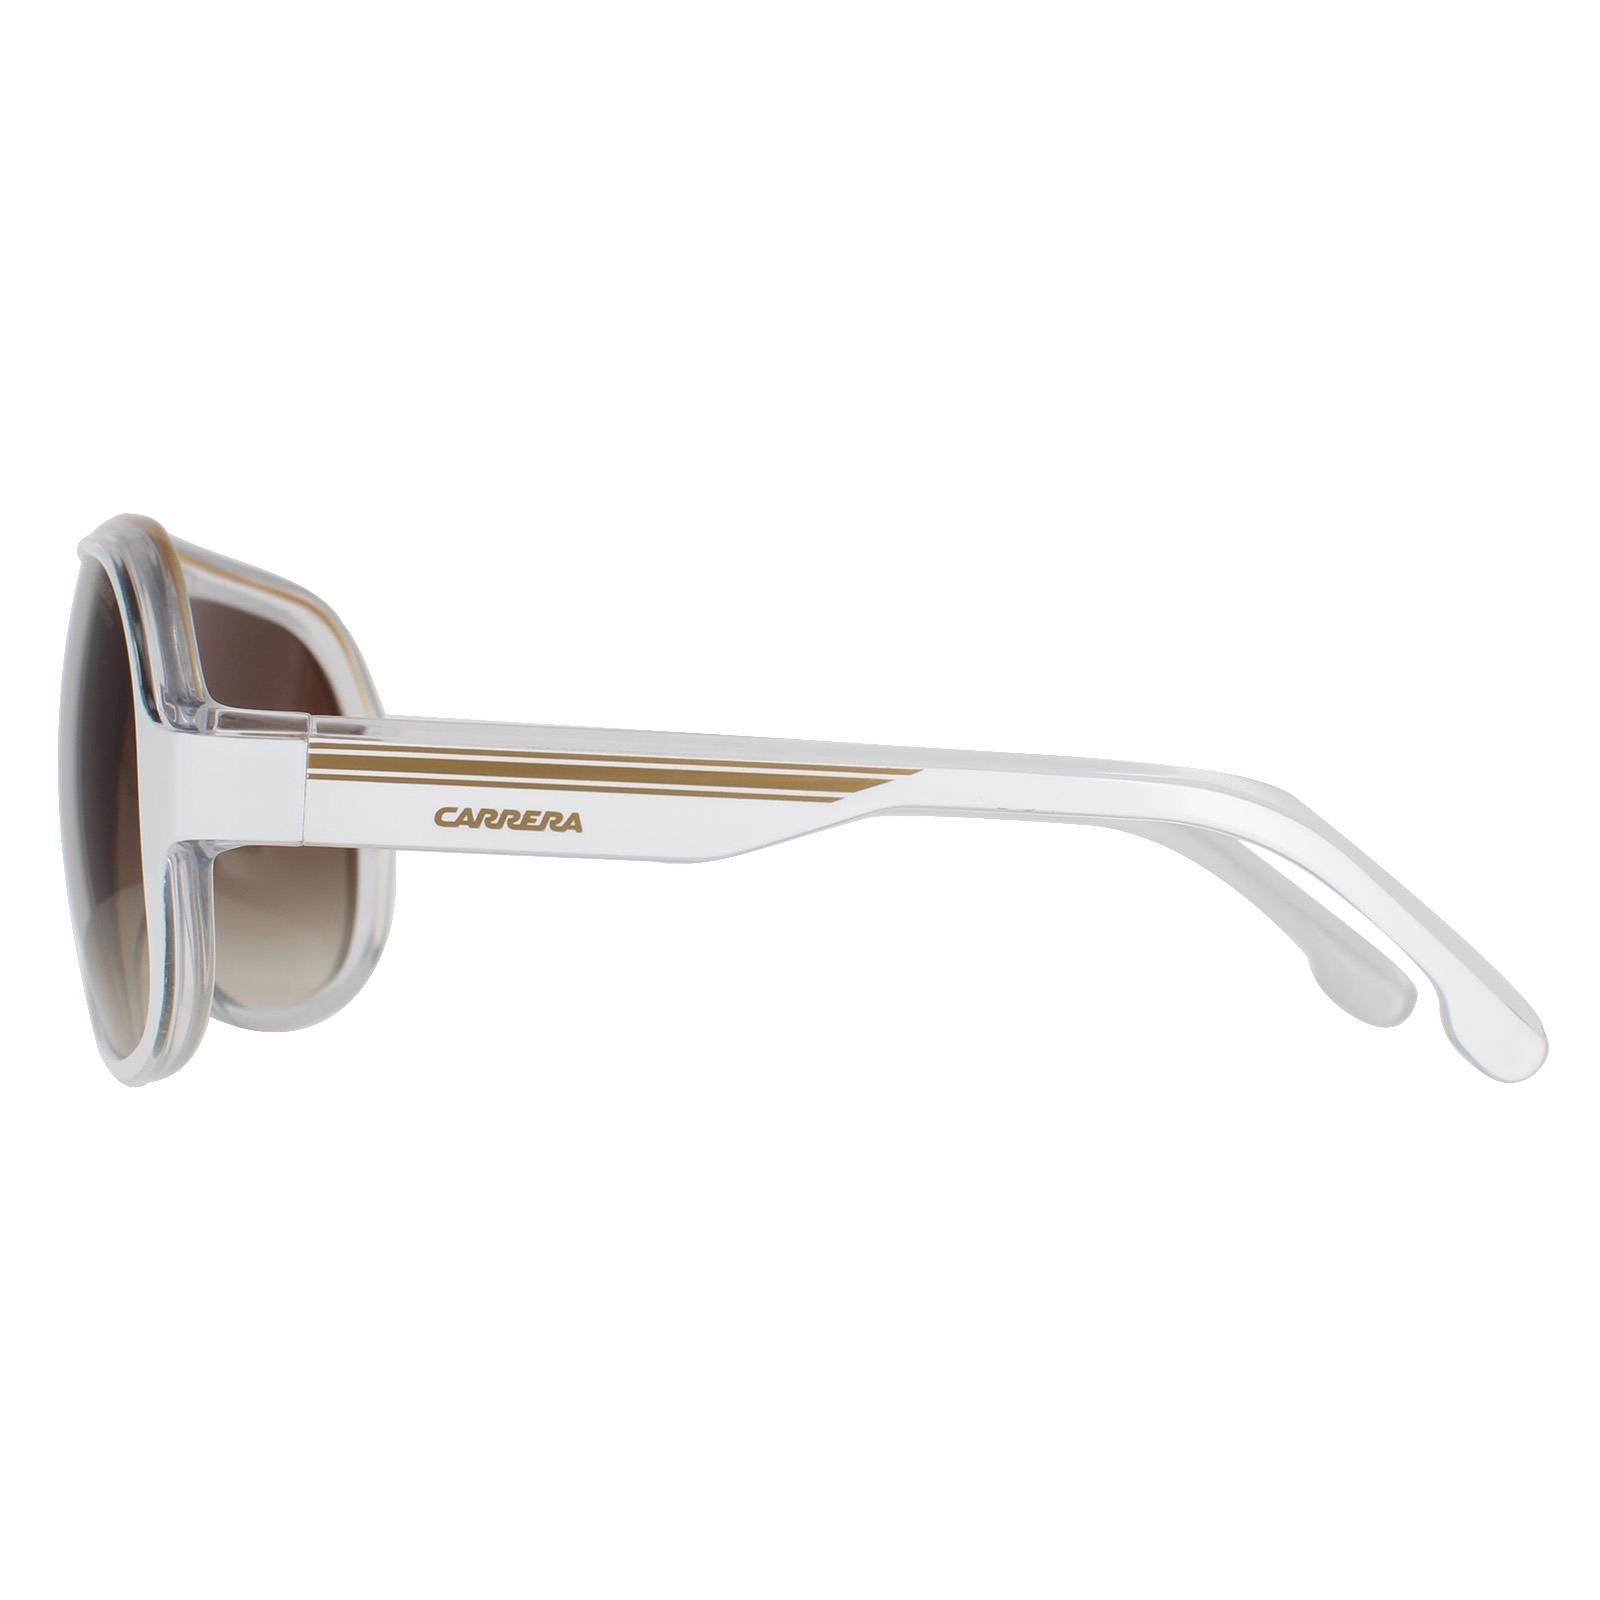 Carrera Aviator Unisex White Crystal Brown Gradient Speedway/N  Carrera are a new model in the Carrera sunglasses range in the classic aviator shape with a retro modern update in this chunky acetate frame